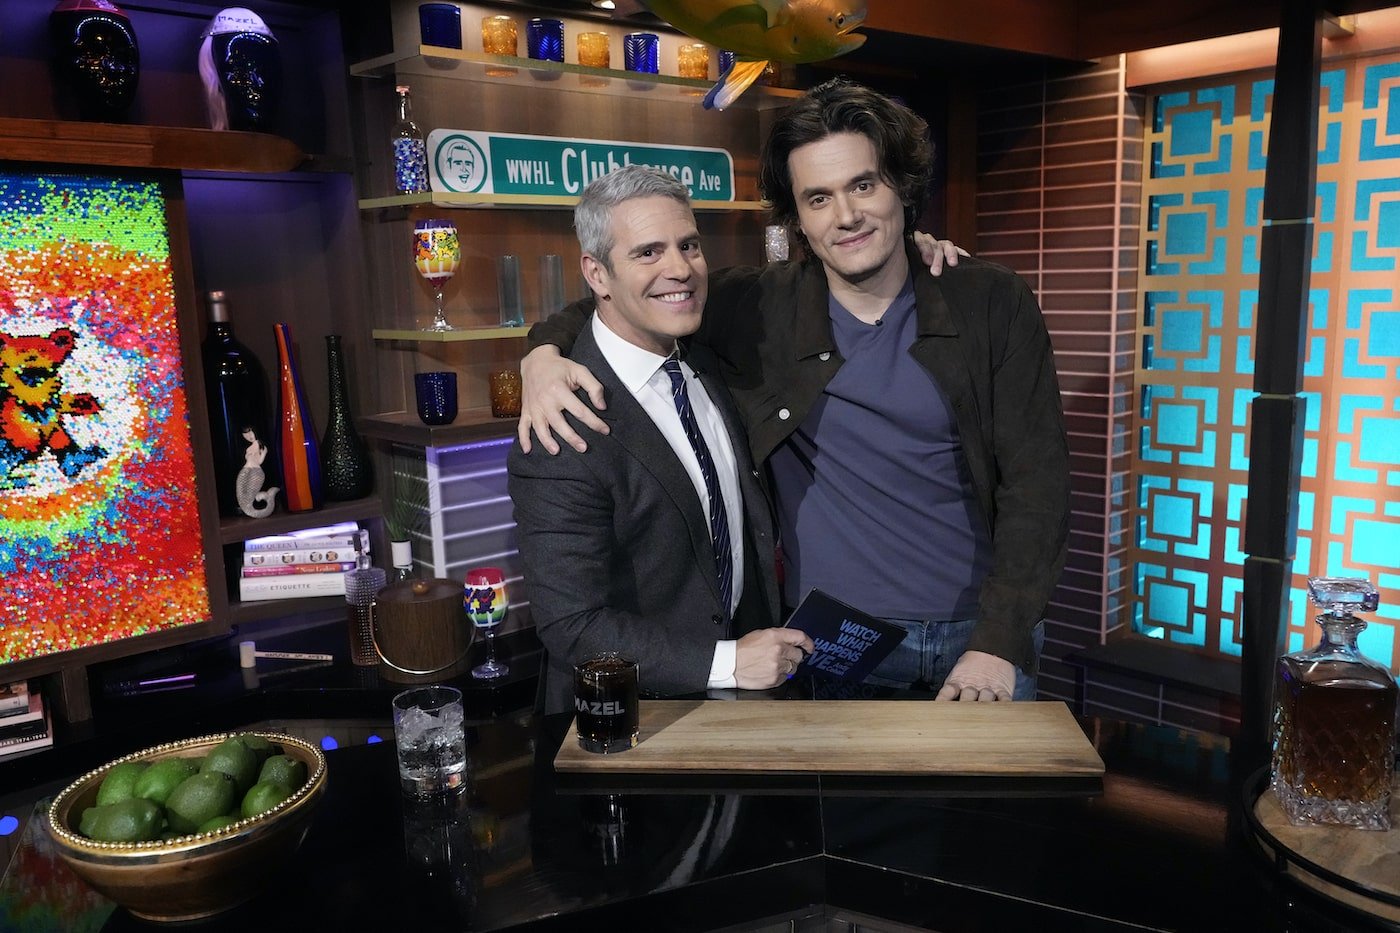 Andy Cohen and John Mayer pose behind the WWHL bar